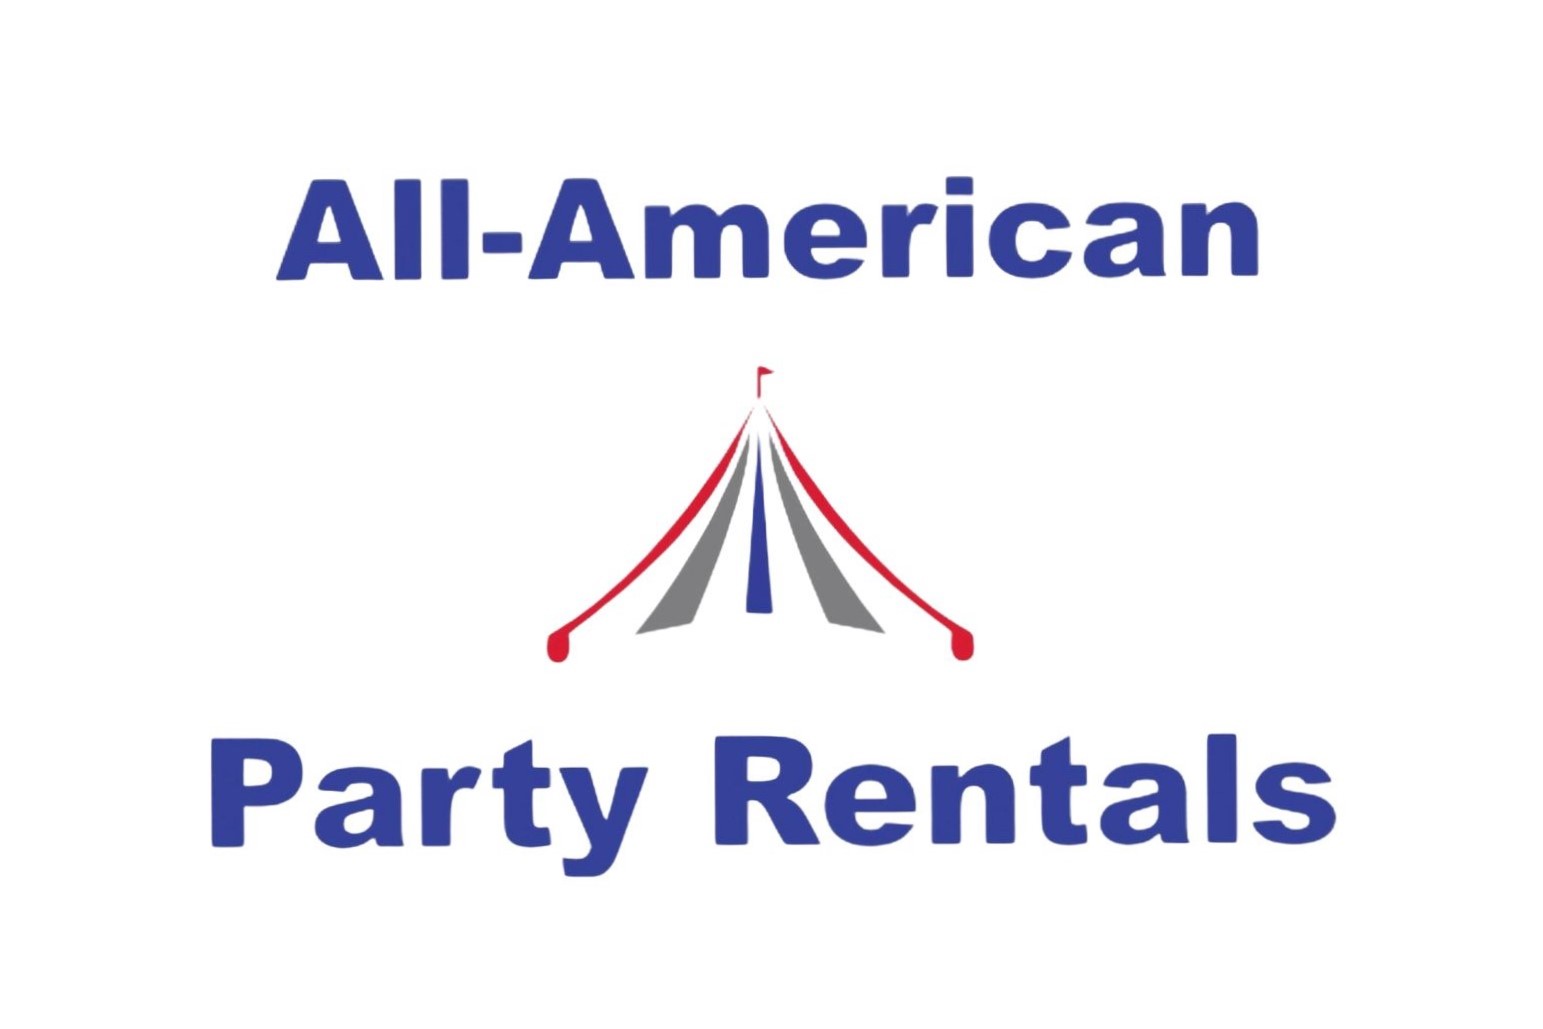 All-American Party Rentals